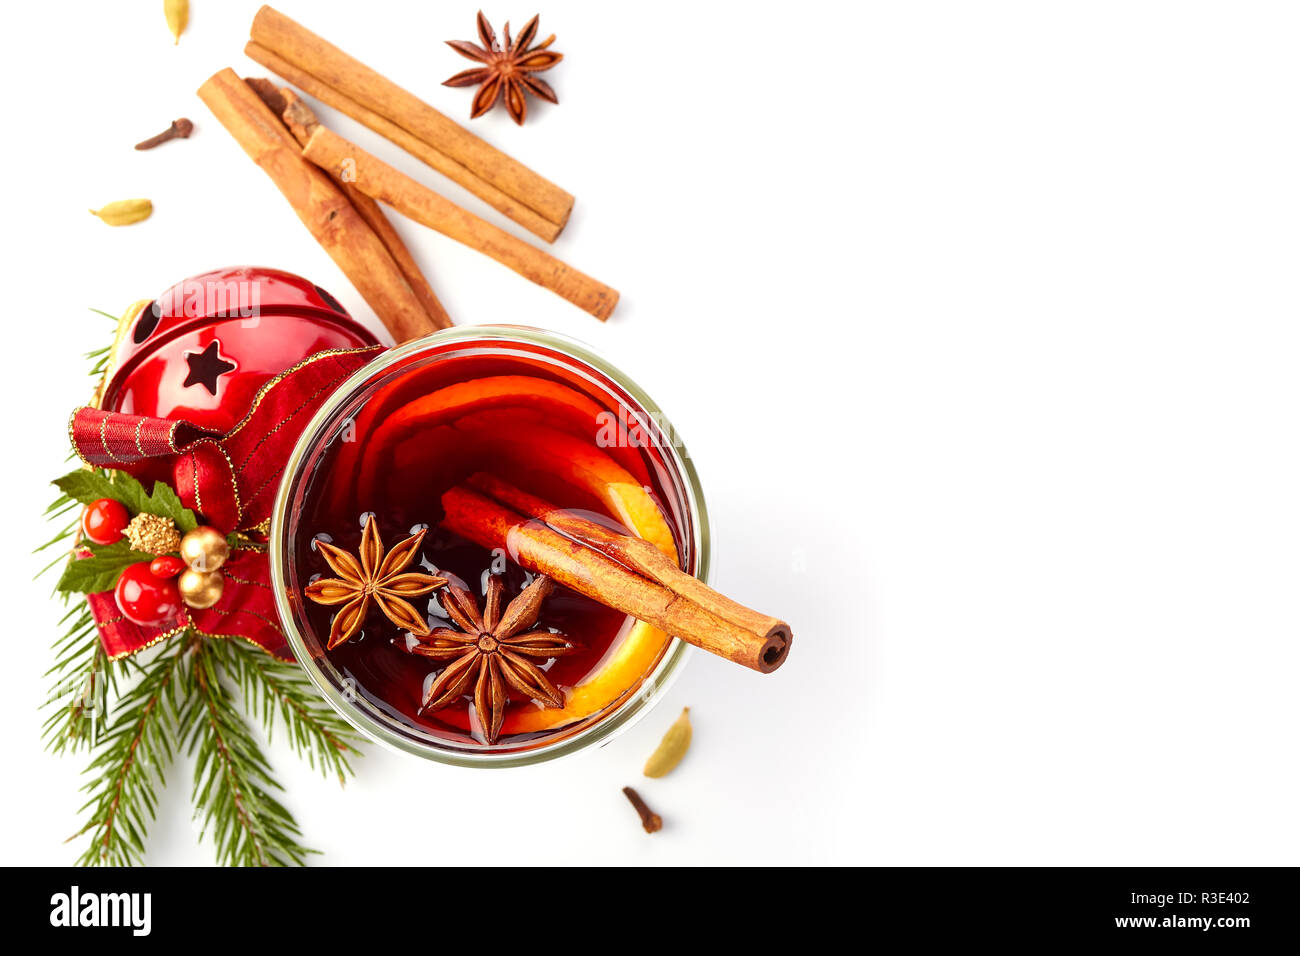 Mulled wine and Christmas decor on white Stock Photo